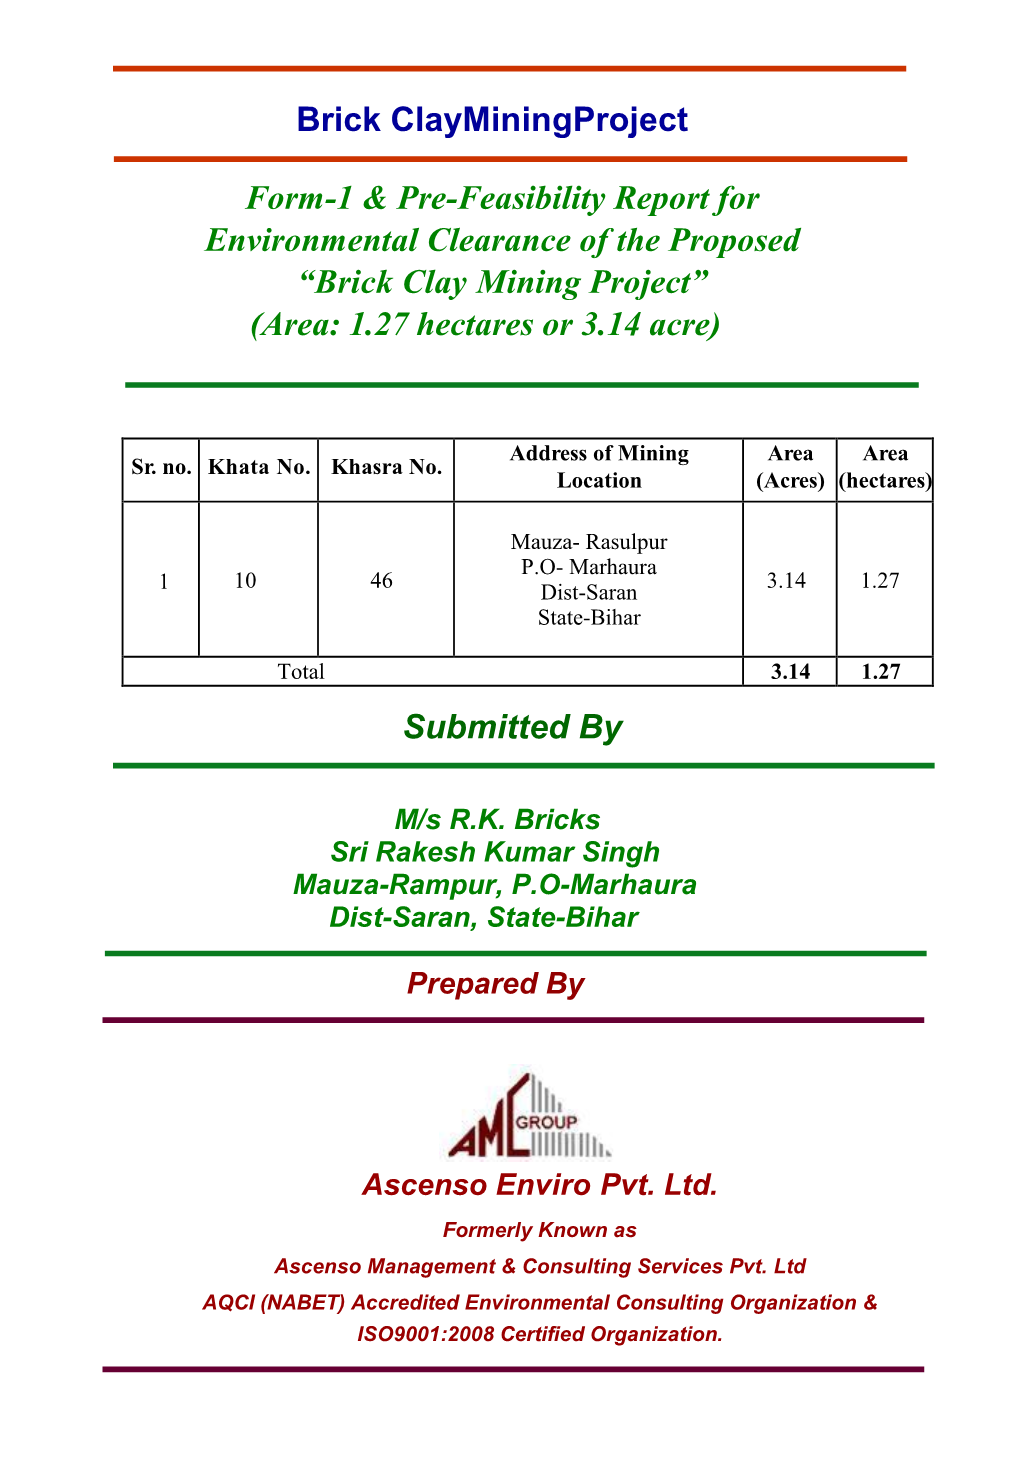 Brick Clayminingproject Form-1 & Pre-Feasibility Report for Environmental Clearance of the Proposed “Brick Clay Mining